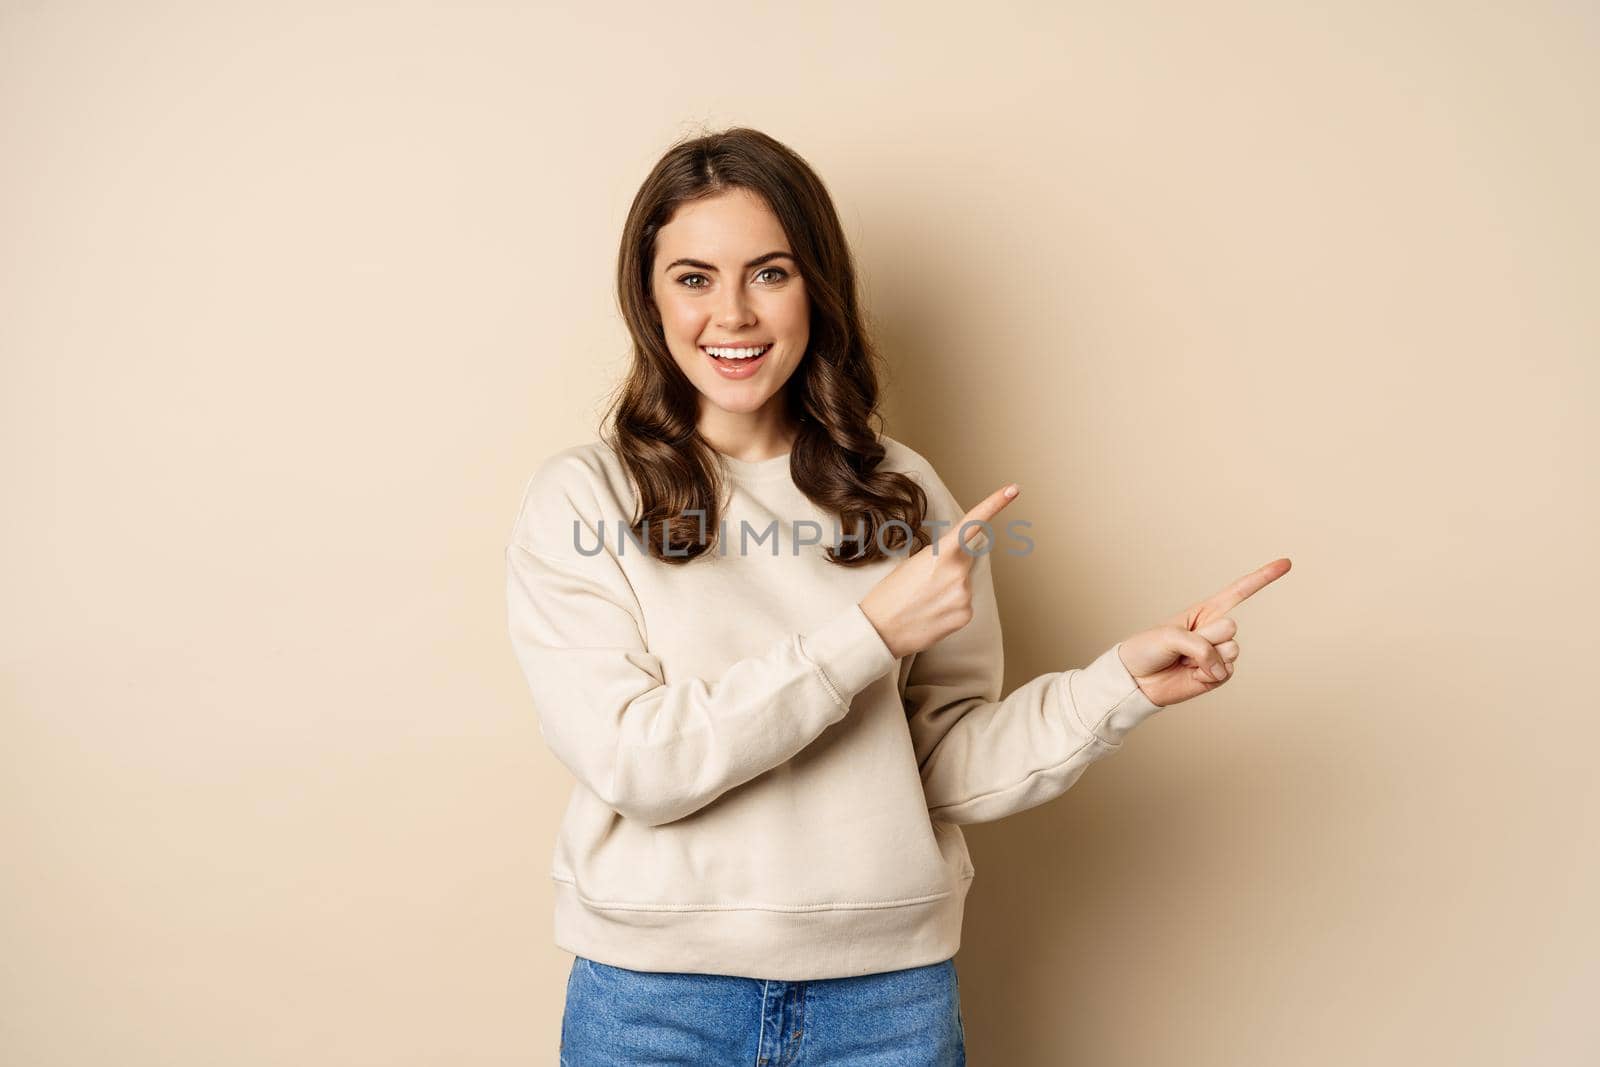 Smiling gorgeous woman pointing fingers right, inviting people, showing logo or banner, standing over beige background.